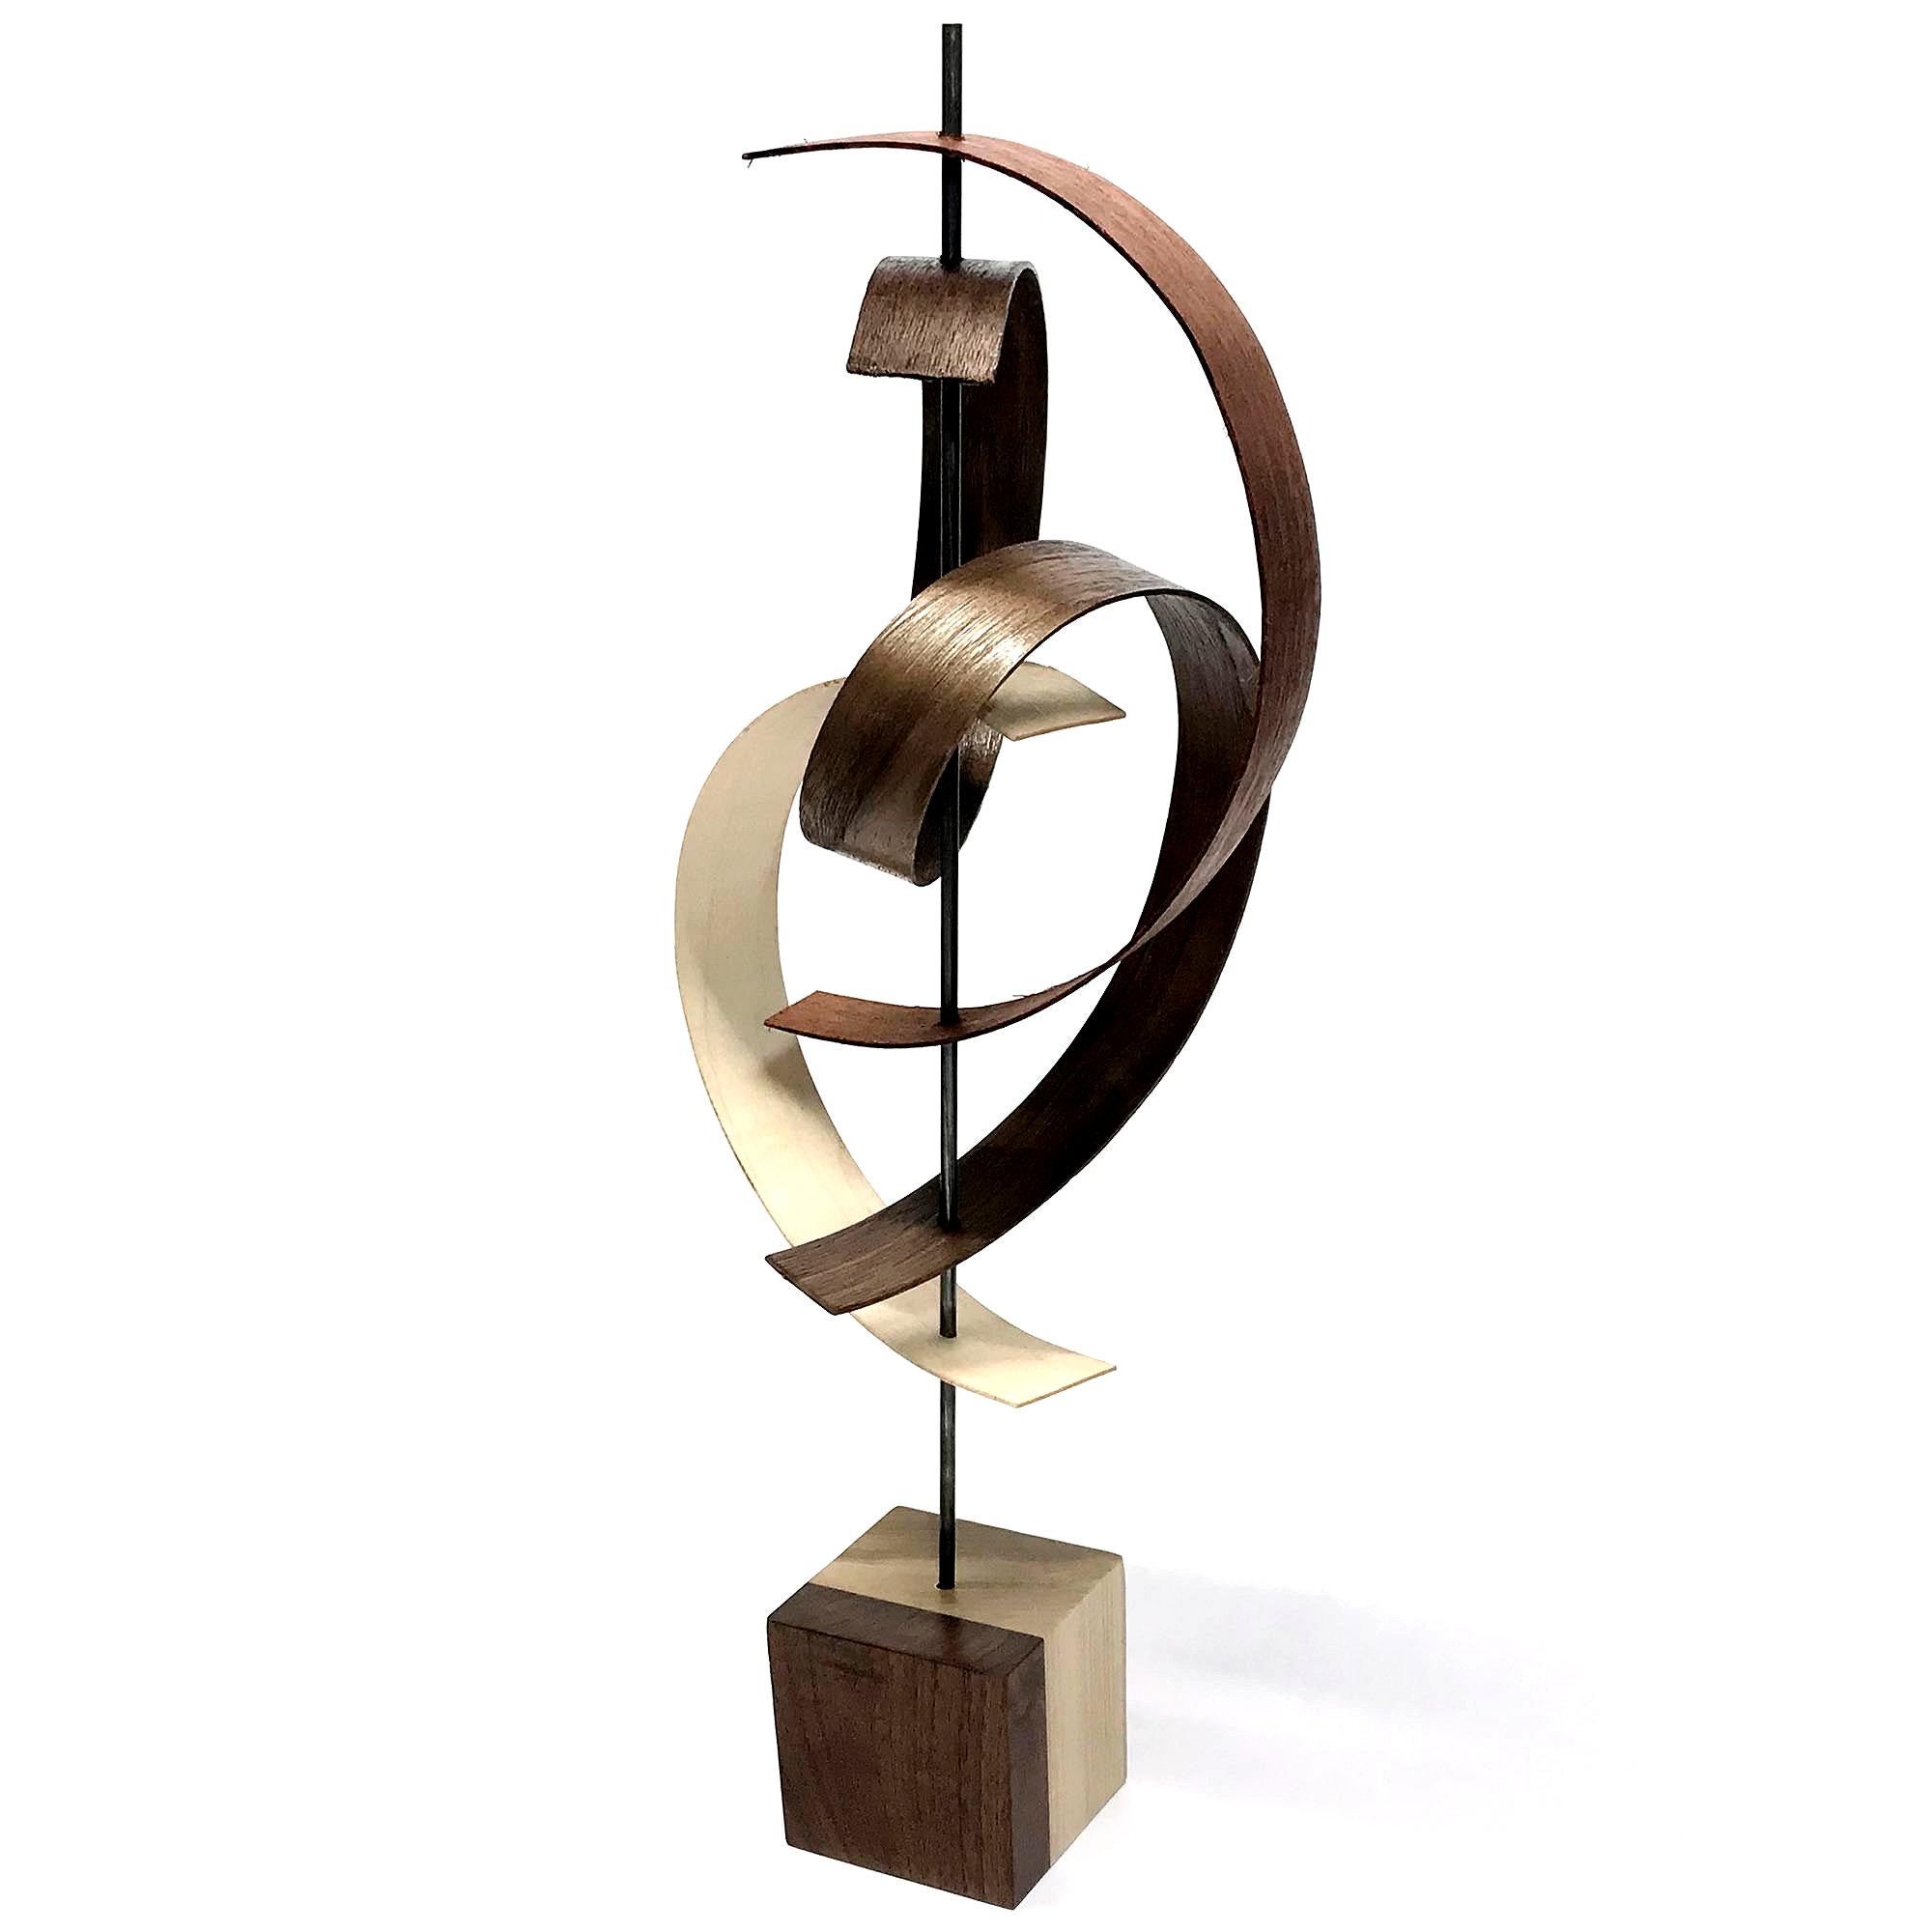 Mid-Century Modern Inspired Contemporary Wood Sculpture by Jeff L. 2